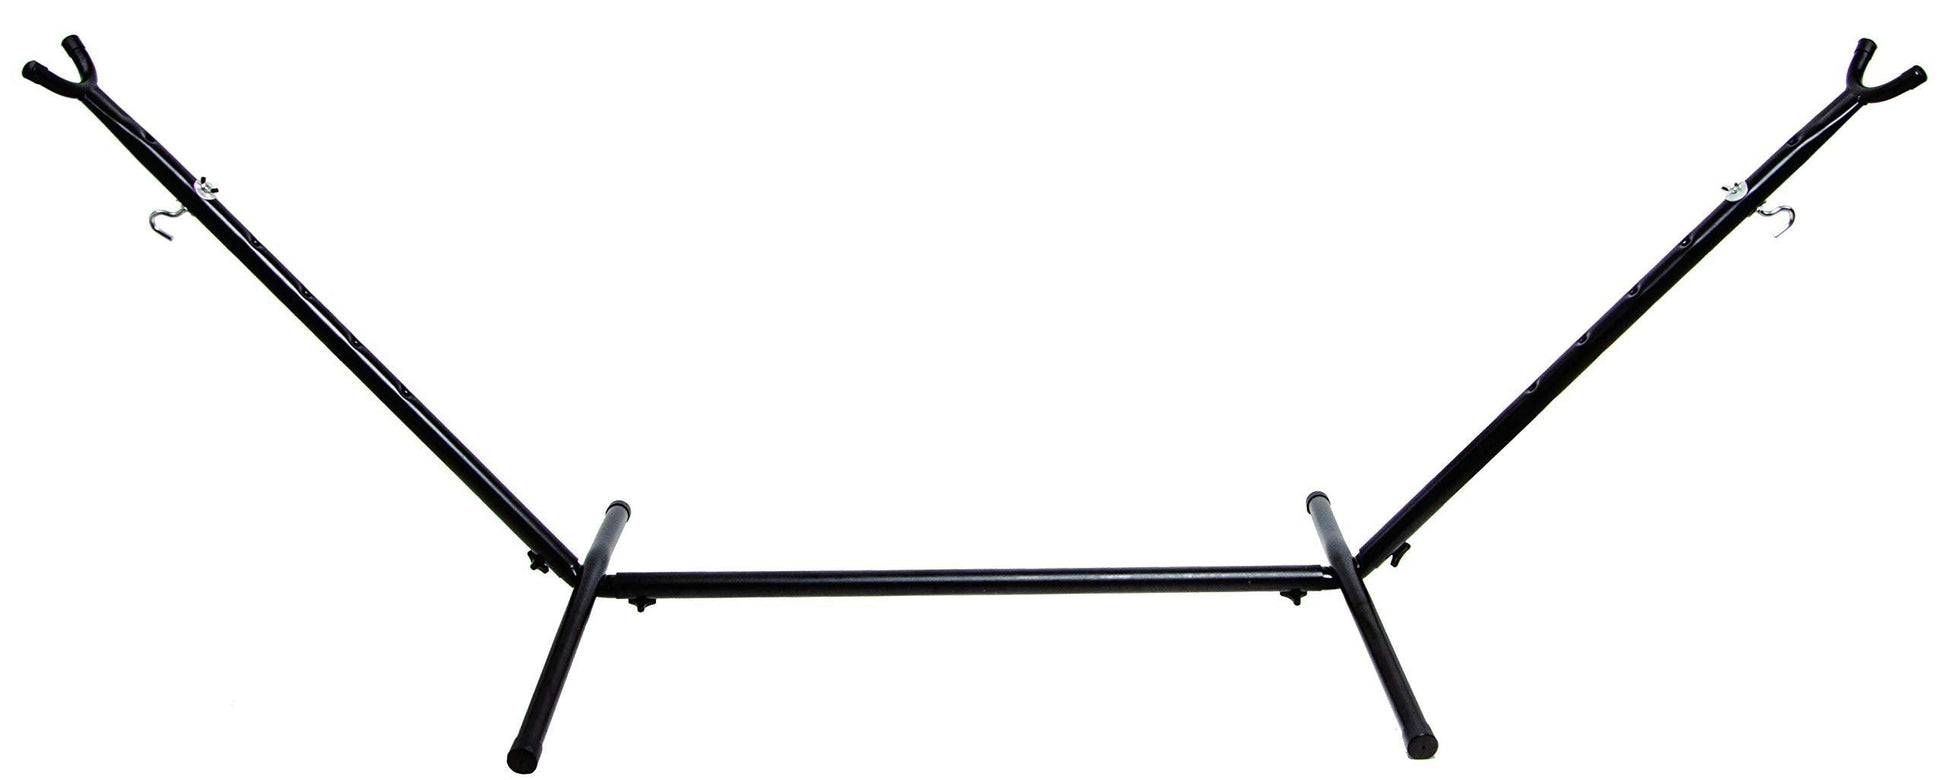 Elevon Heavy Duty Adjustable Steel Hammock Stand, 9-Foot, 450-Pound Capacity, Weather Resistant, Easy to Assemble - CookCave